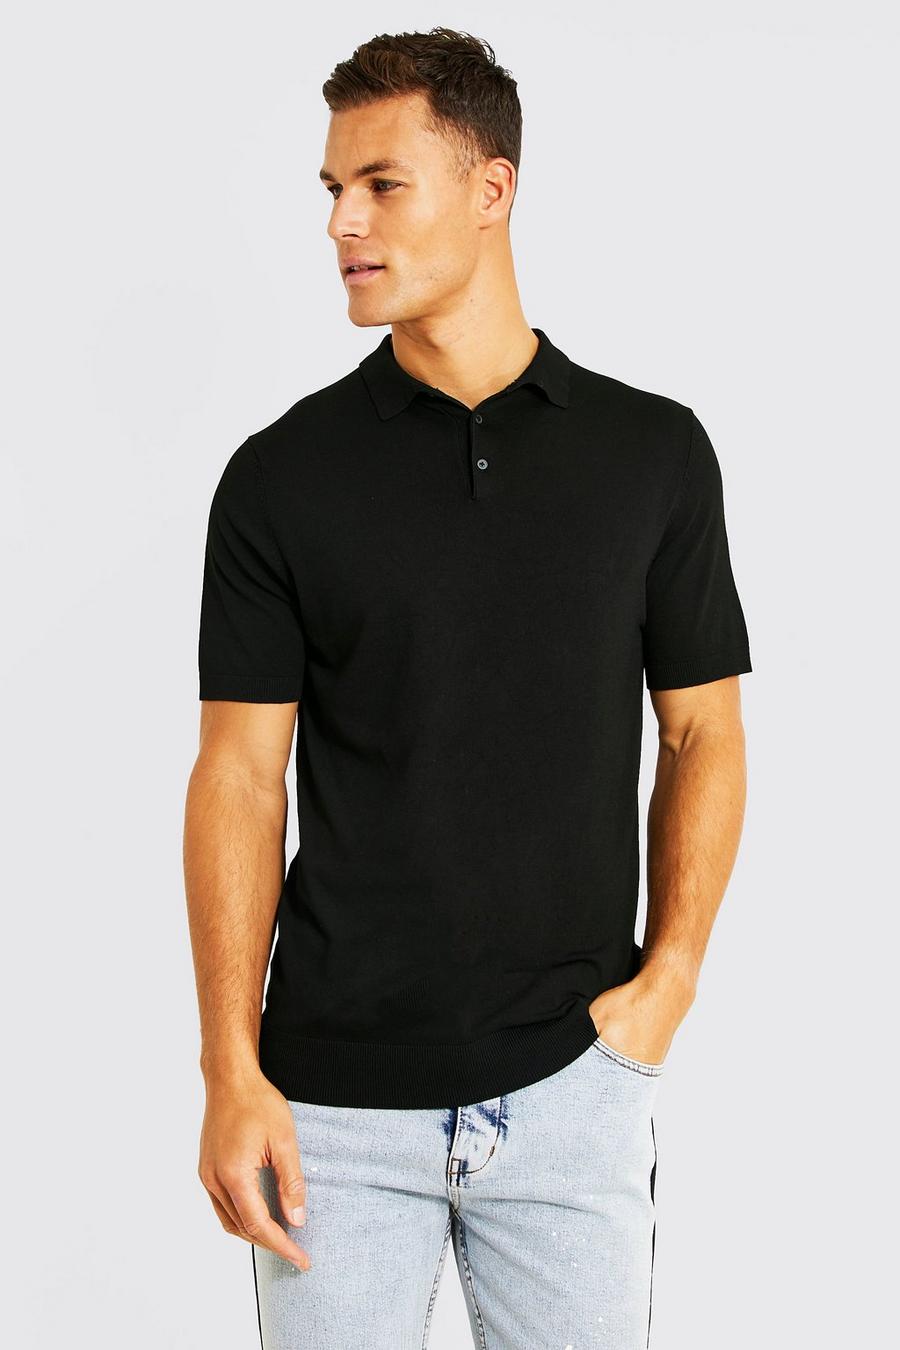 Black negro Tall Short Sleeve Knitted Polo